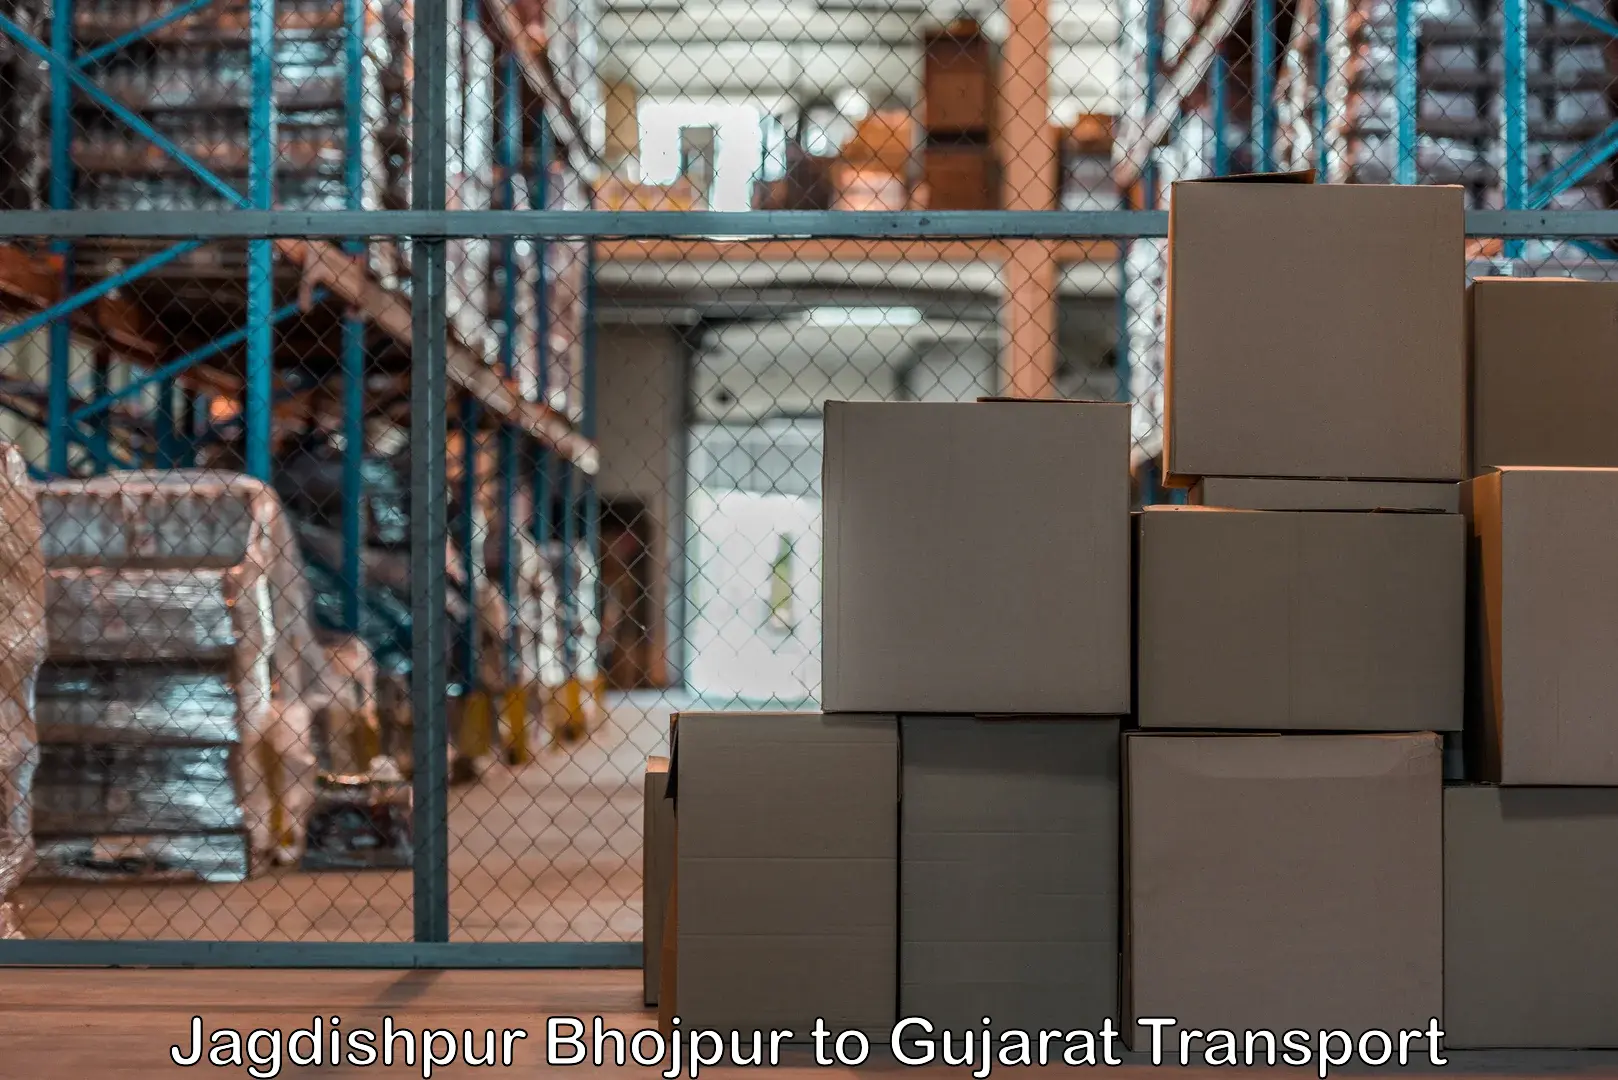 Goods delivery service Jagdishpur Bhojpur to Dholera